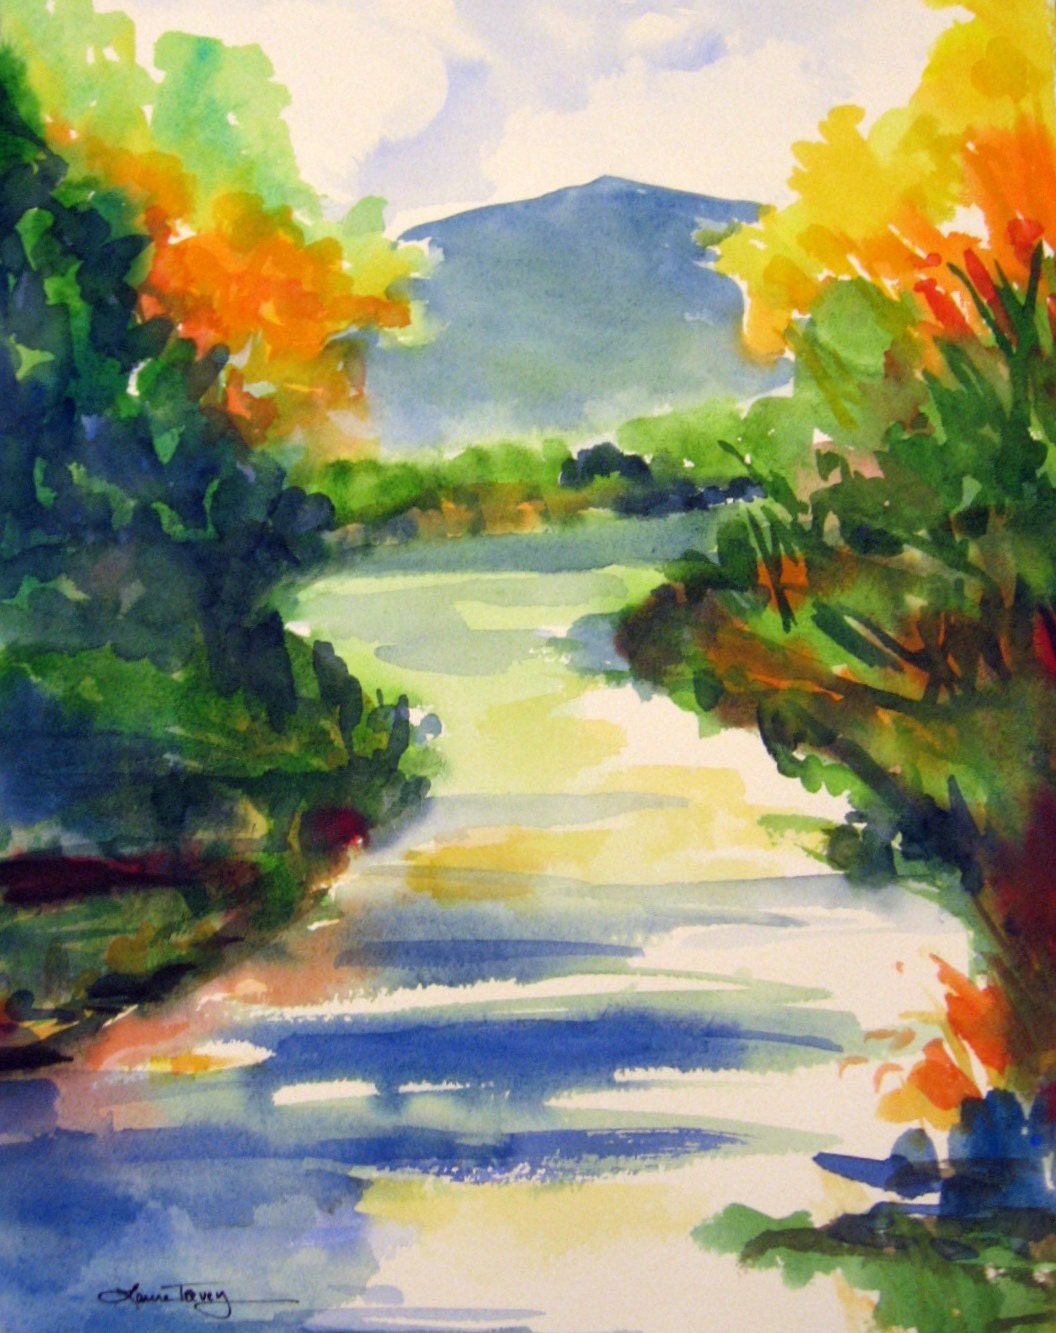 Fresh Air, Original Watercolor Painting by Laura L Trevey, Large 11 by 15